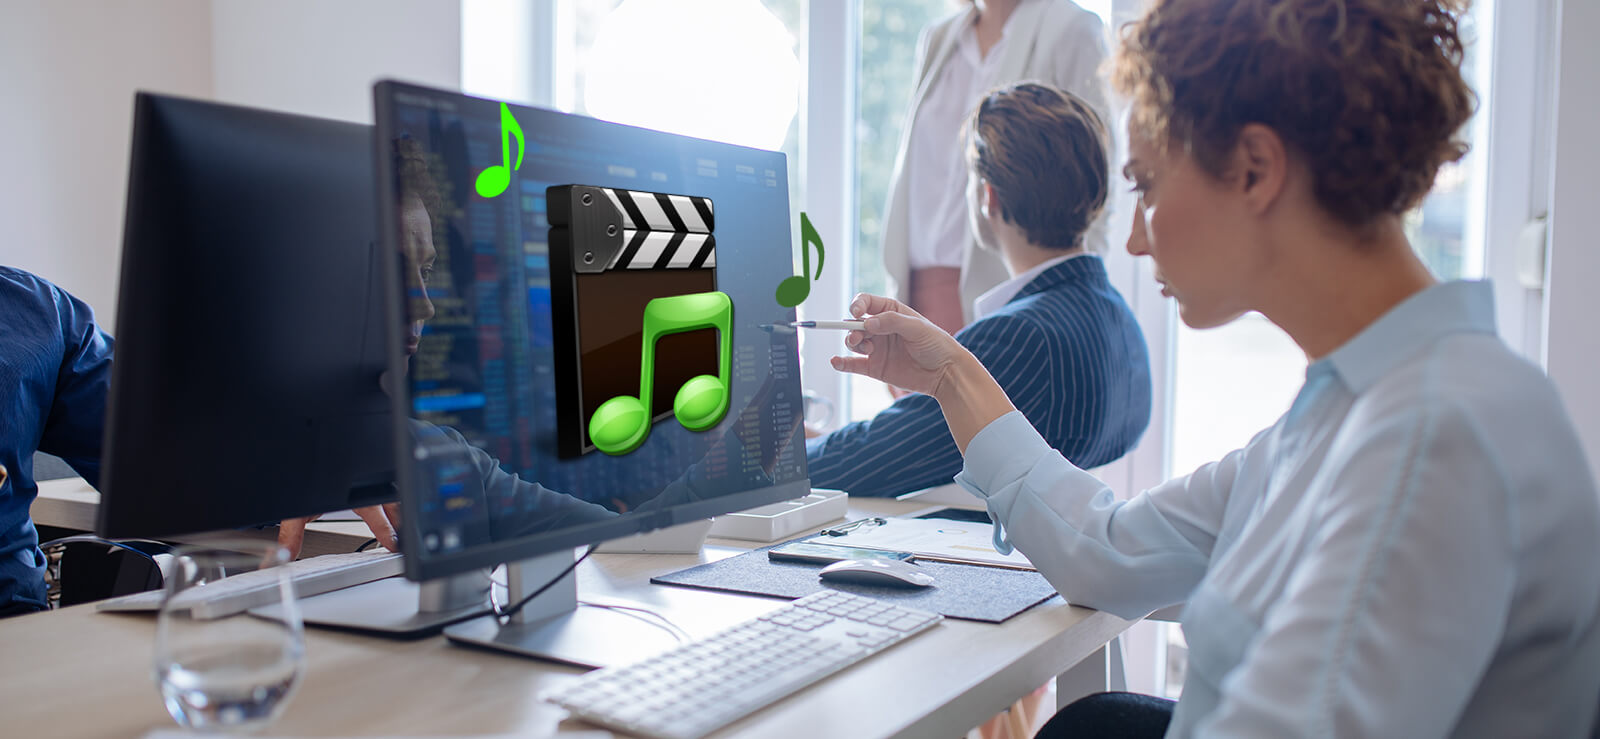 Free MP3 Video Converter Tools for Audio Extraction from Video Files